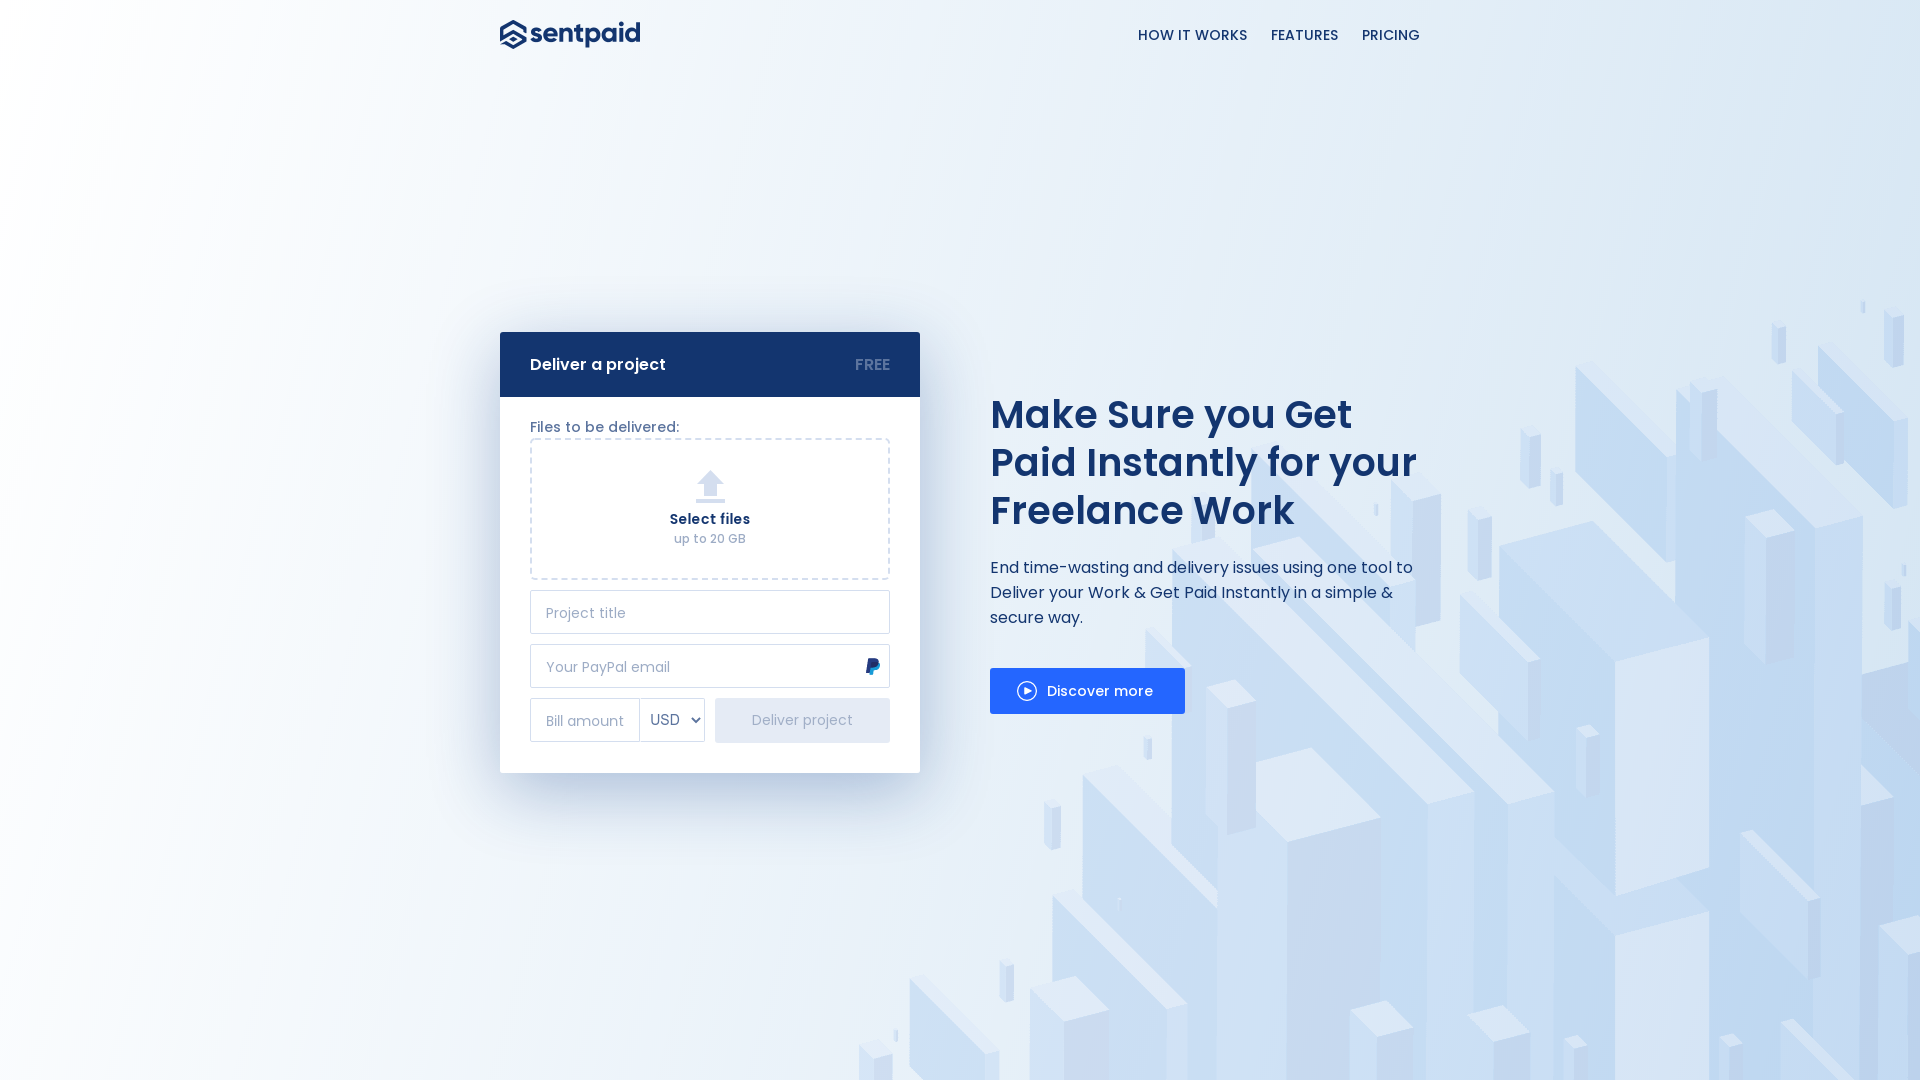 Get feedback from a vast remote working audience about Sentpaid